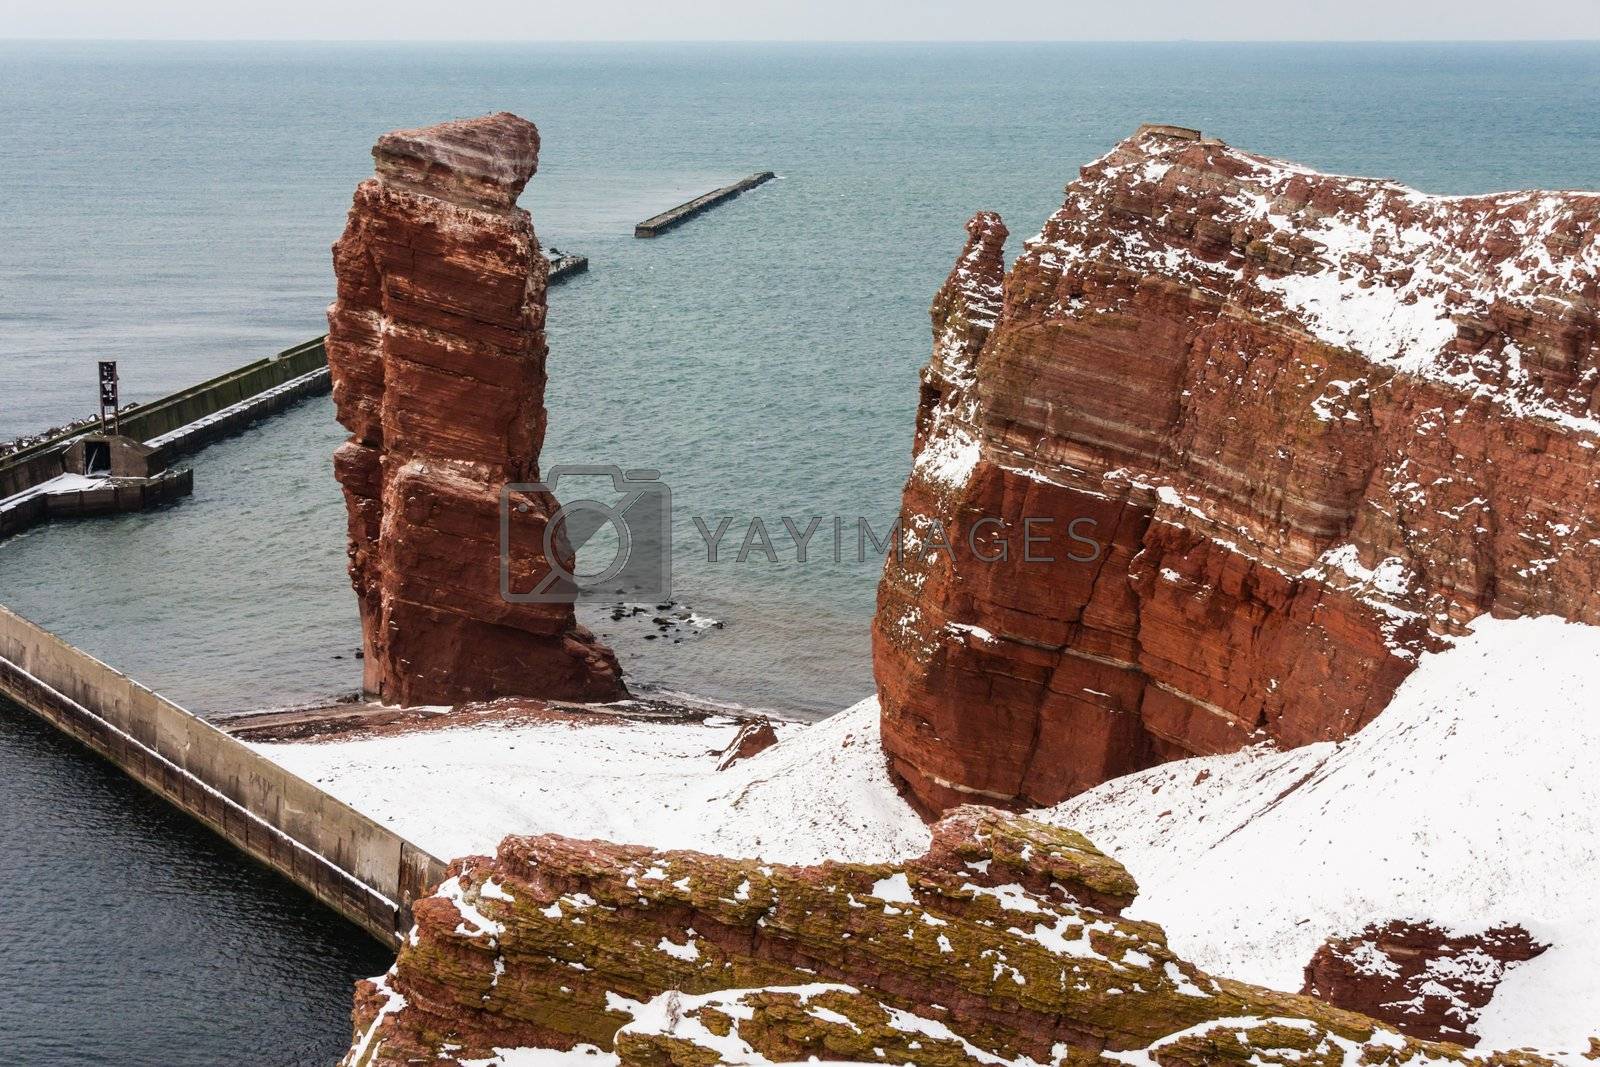 Royalty free image of Lange Anna in Winter, Helgoland by Copit